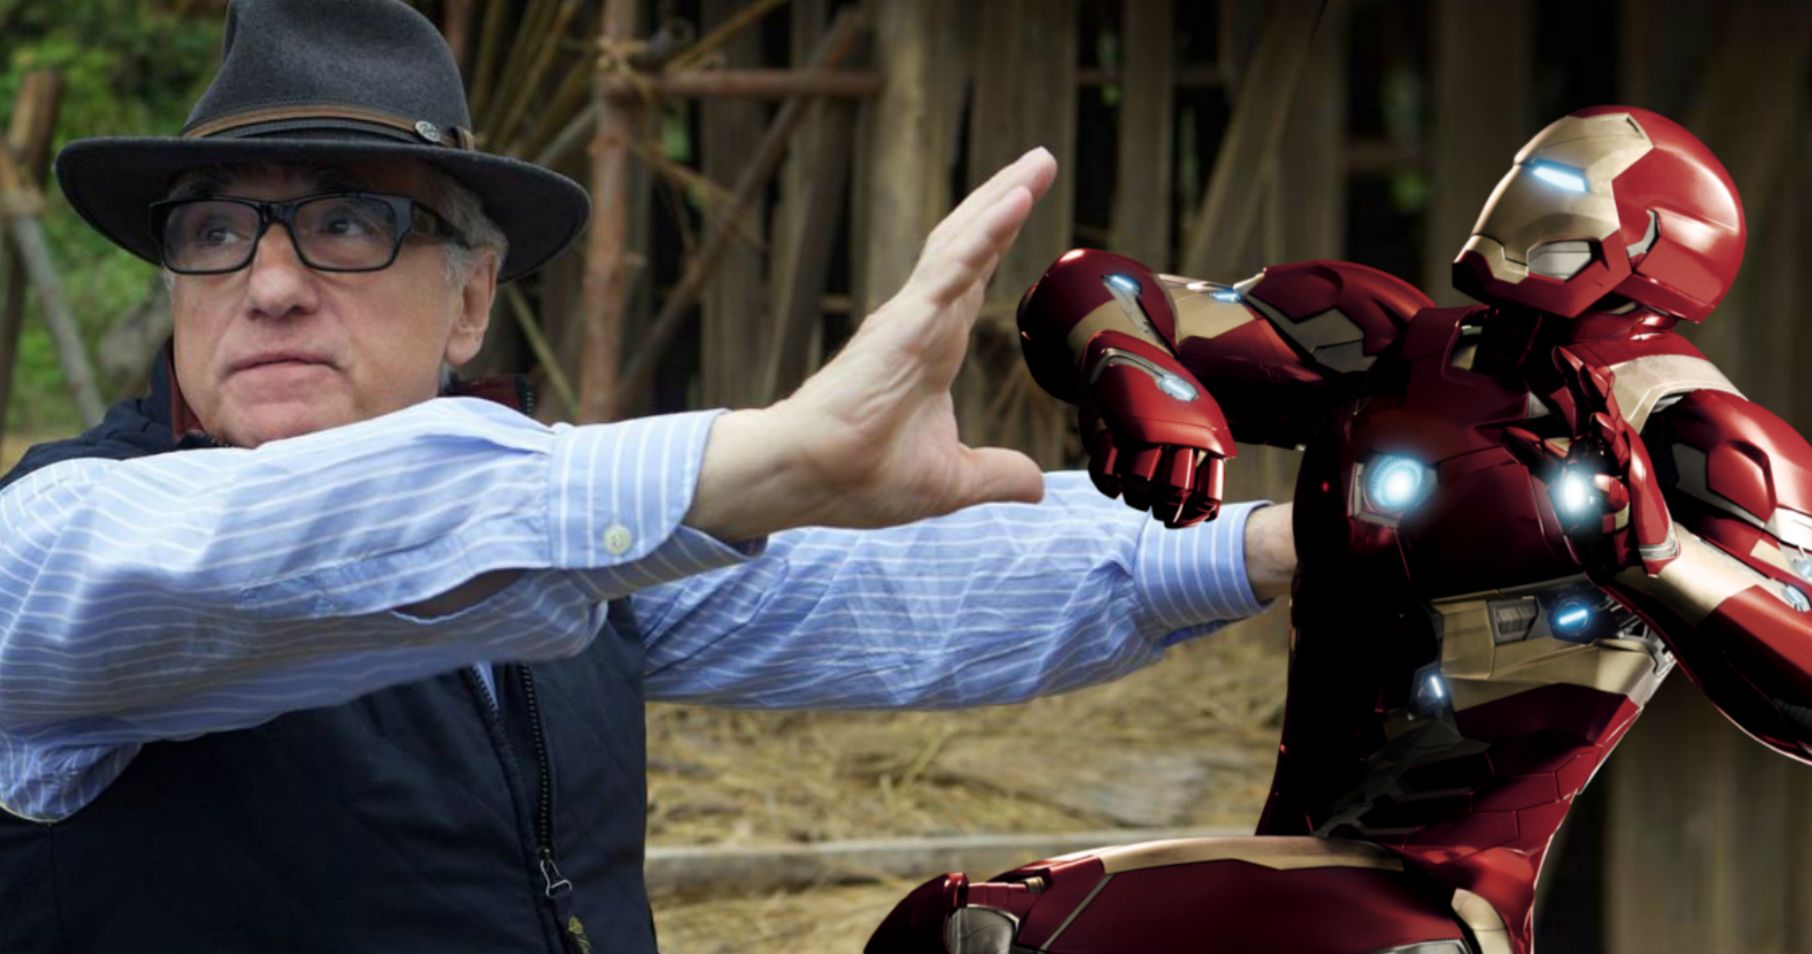 Scorsese Goes All-In on Controversial Marvel Comments in Passionate New Op-Ed